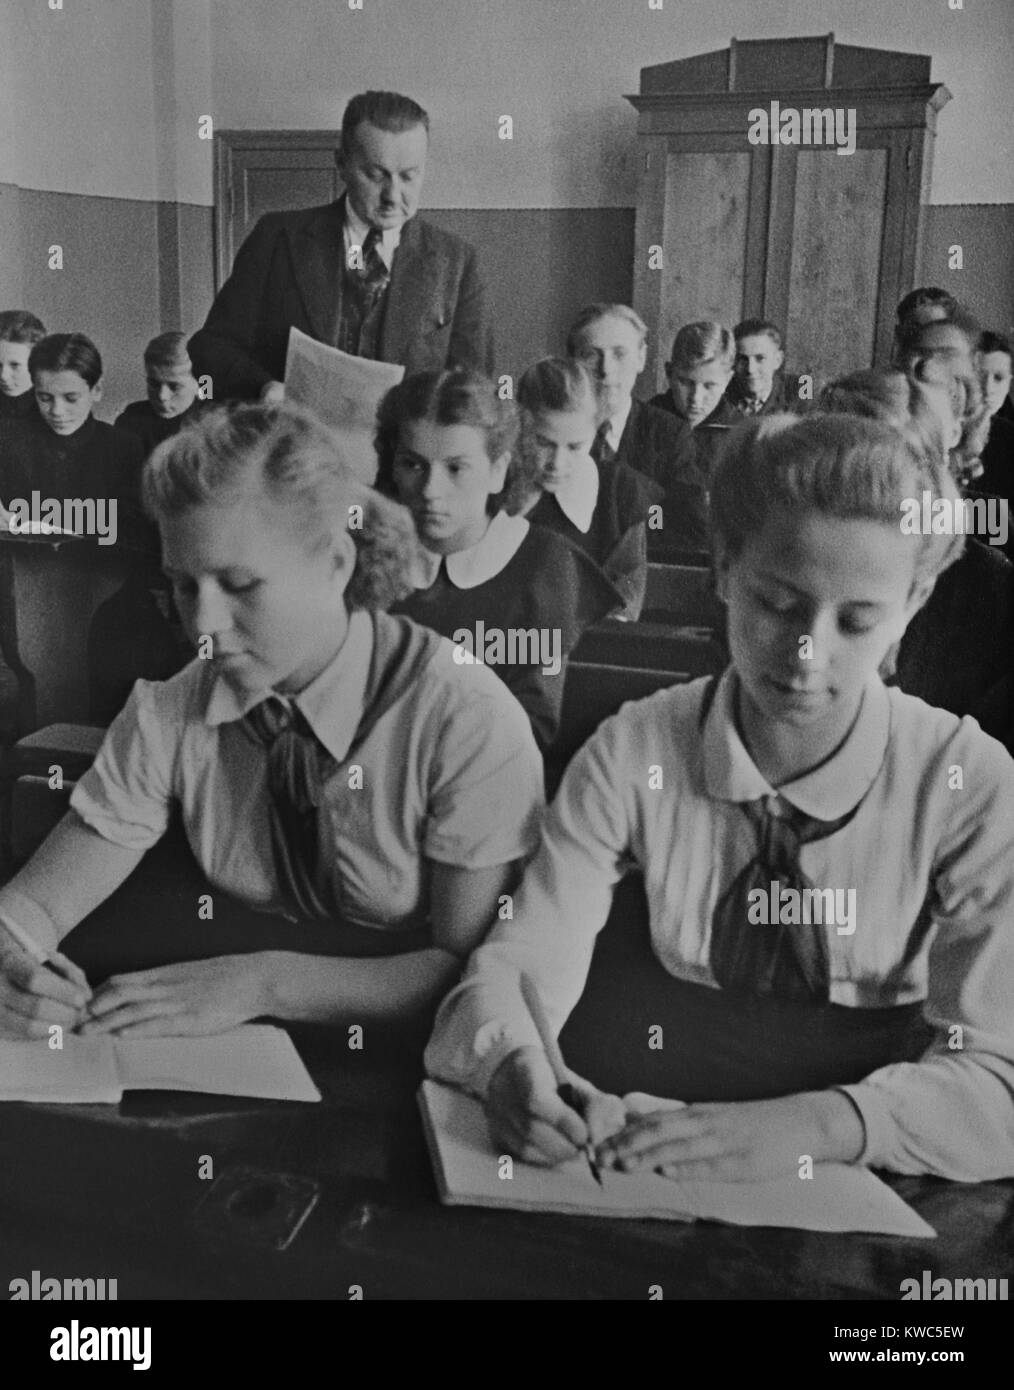 Young Pioneer girls sitting at the front desk in a Latvian USSR sixth grade classroom. They wear the red scarfed uniforms of the Communist youth organization in 1940. Latvia was forcibly incorporated into the Communist Soviet Union after the signing of the 1939 Nazi German-Soviet Non-Aggression Pact. (BSLOC 2015 14 8) Stock Photo